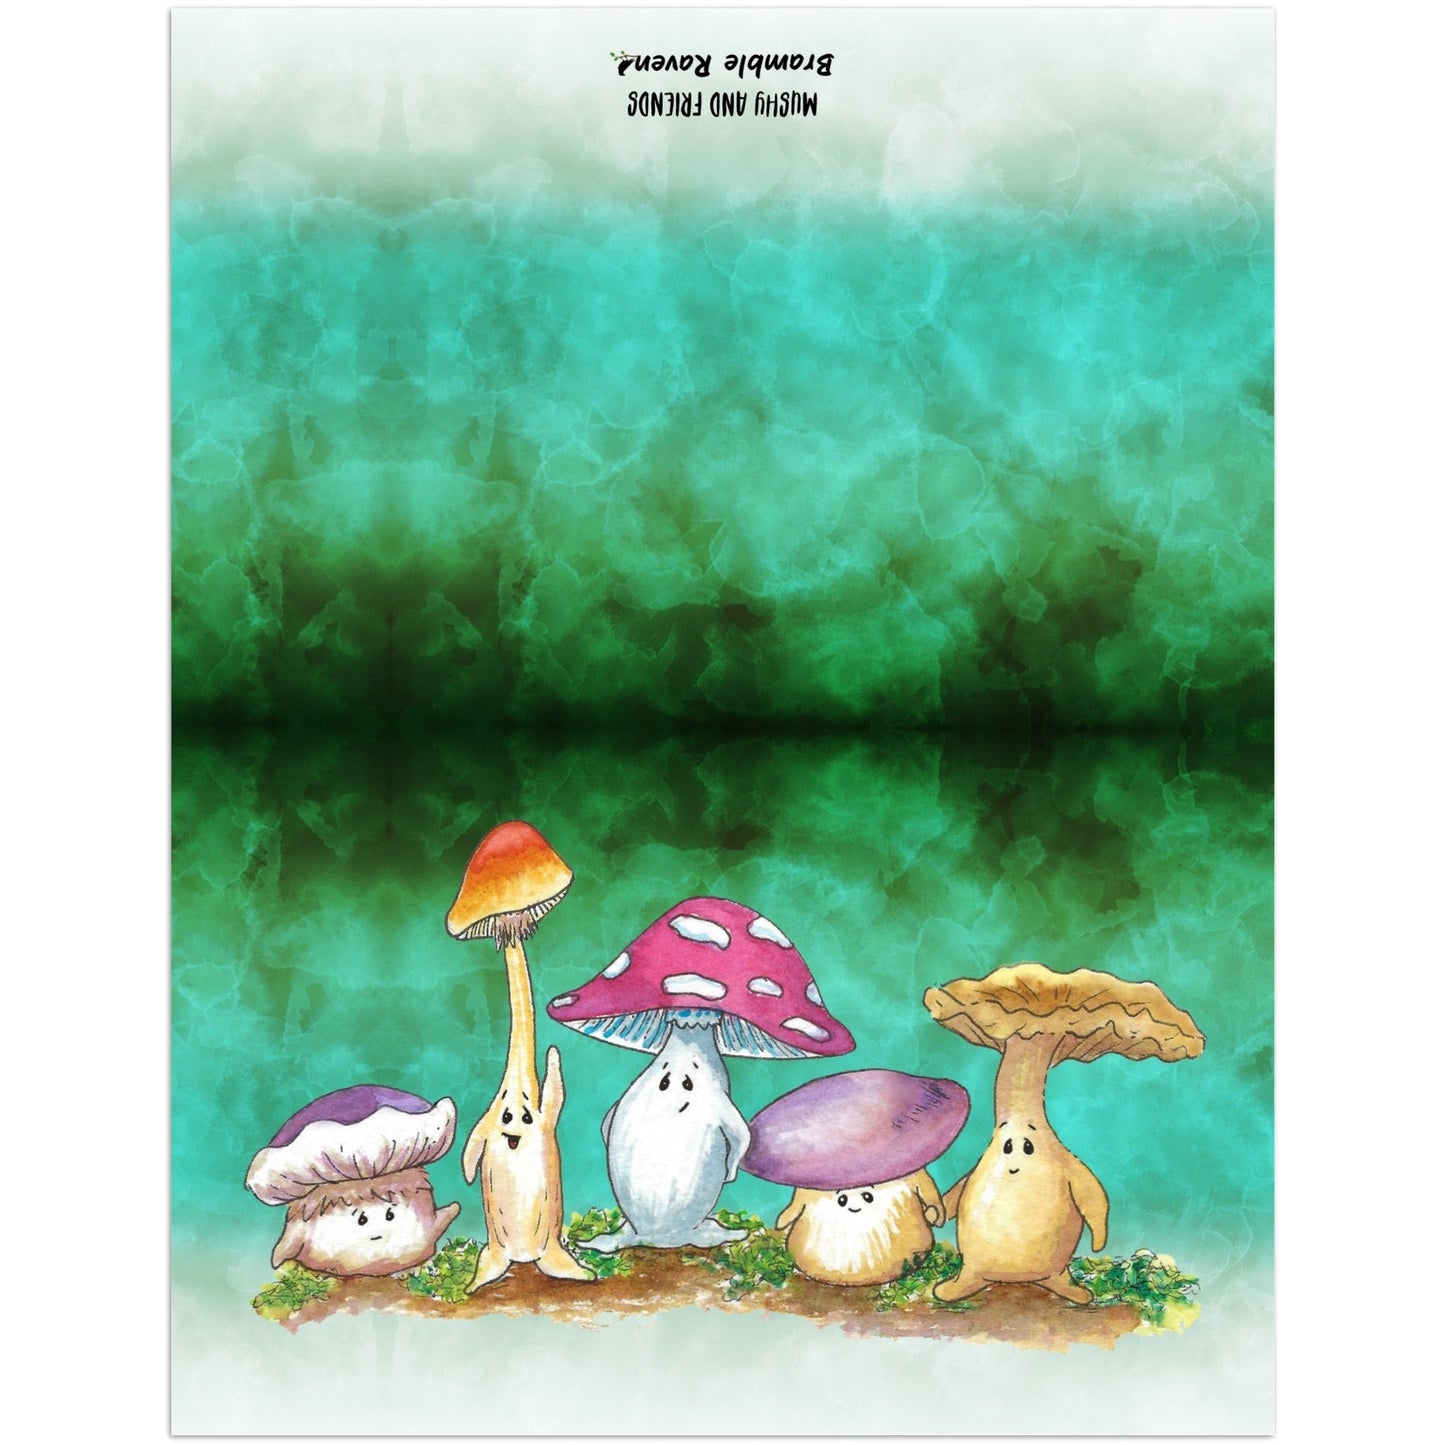 A pack of ten greeting cards and envelopes.  Each card is 5.5  by 8.5 inches. The front features Mushy and his whimsical mushroom friends on a green gradient background. The inside has a slim green border and plenty of room for your message.